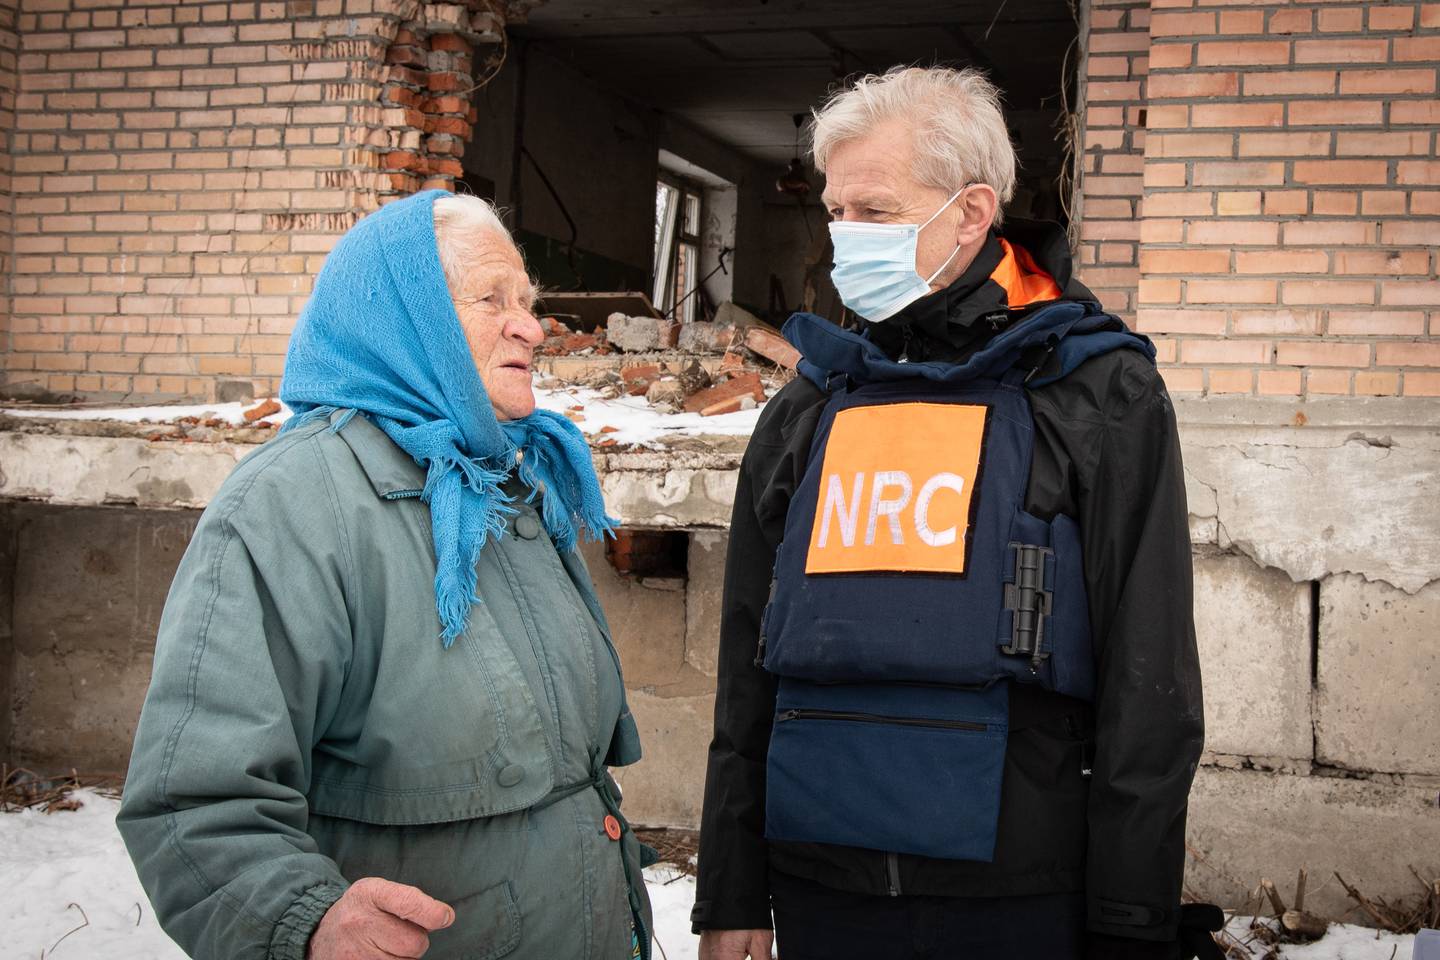 RC Secretary General Jan Egeland visiting Opytne, a frontline village in Donetsk region, Eastern Ukraine.
At the photo he is speaking with Zinaida (71) who has remained in the village, despite seeing her house destroyed in the shelling.

“The war made me old too fast,” she said.
“But I still must care for my husband who got cancer because he did rescue work at Chernobyl after the nuclear accident there”.